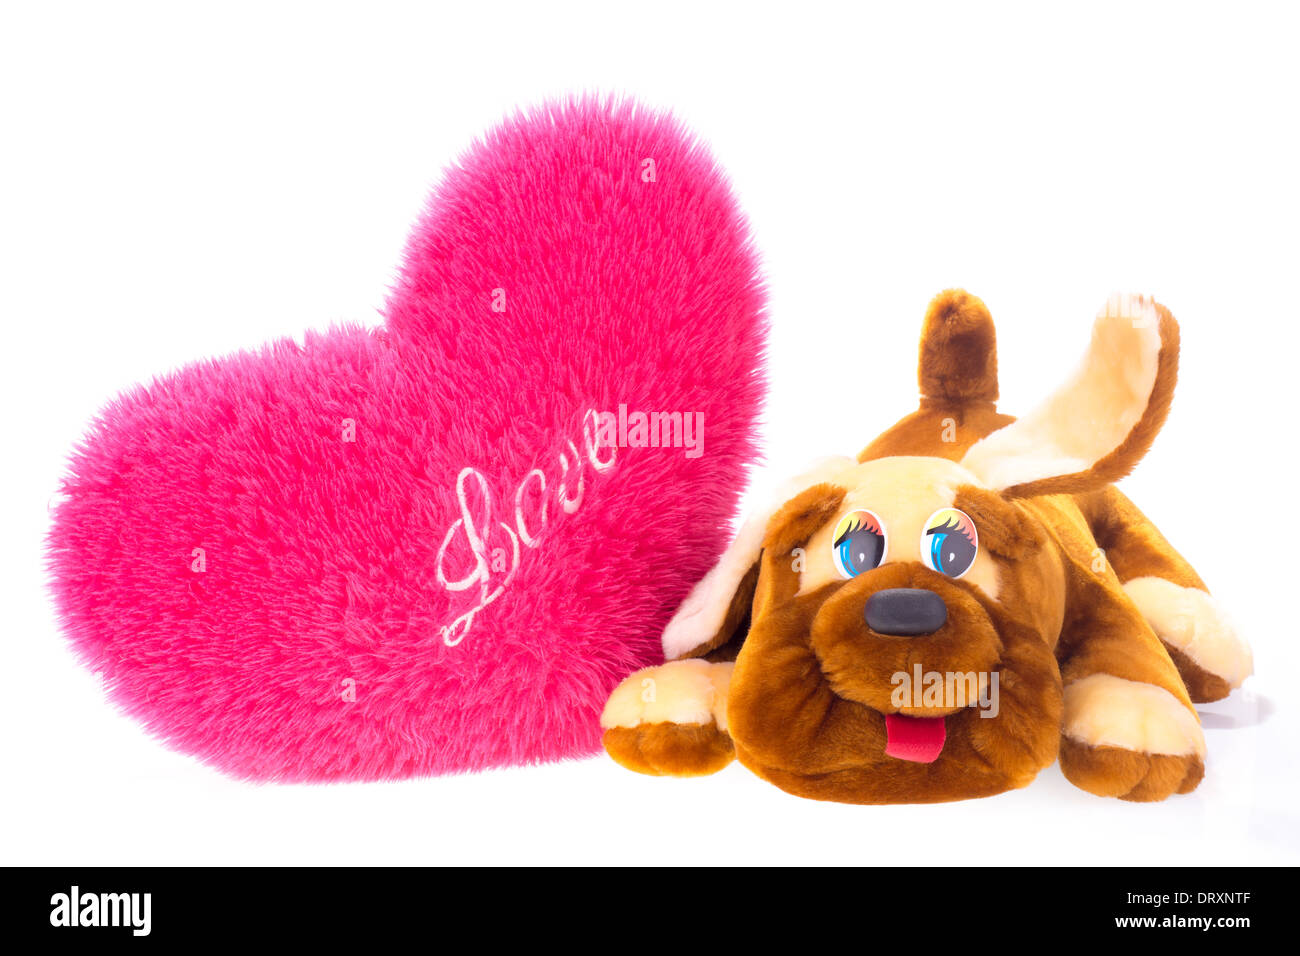 Toy dog and heart-shaped pillow isolated on white Stock Photo